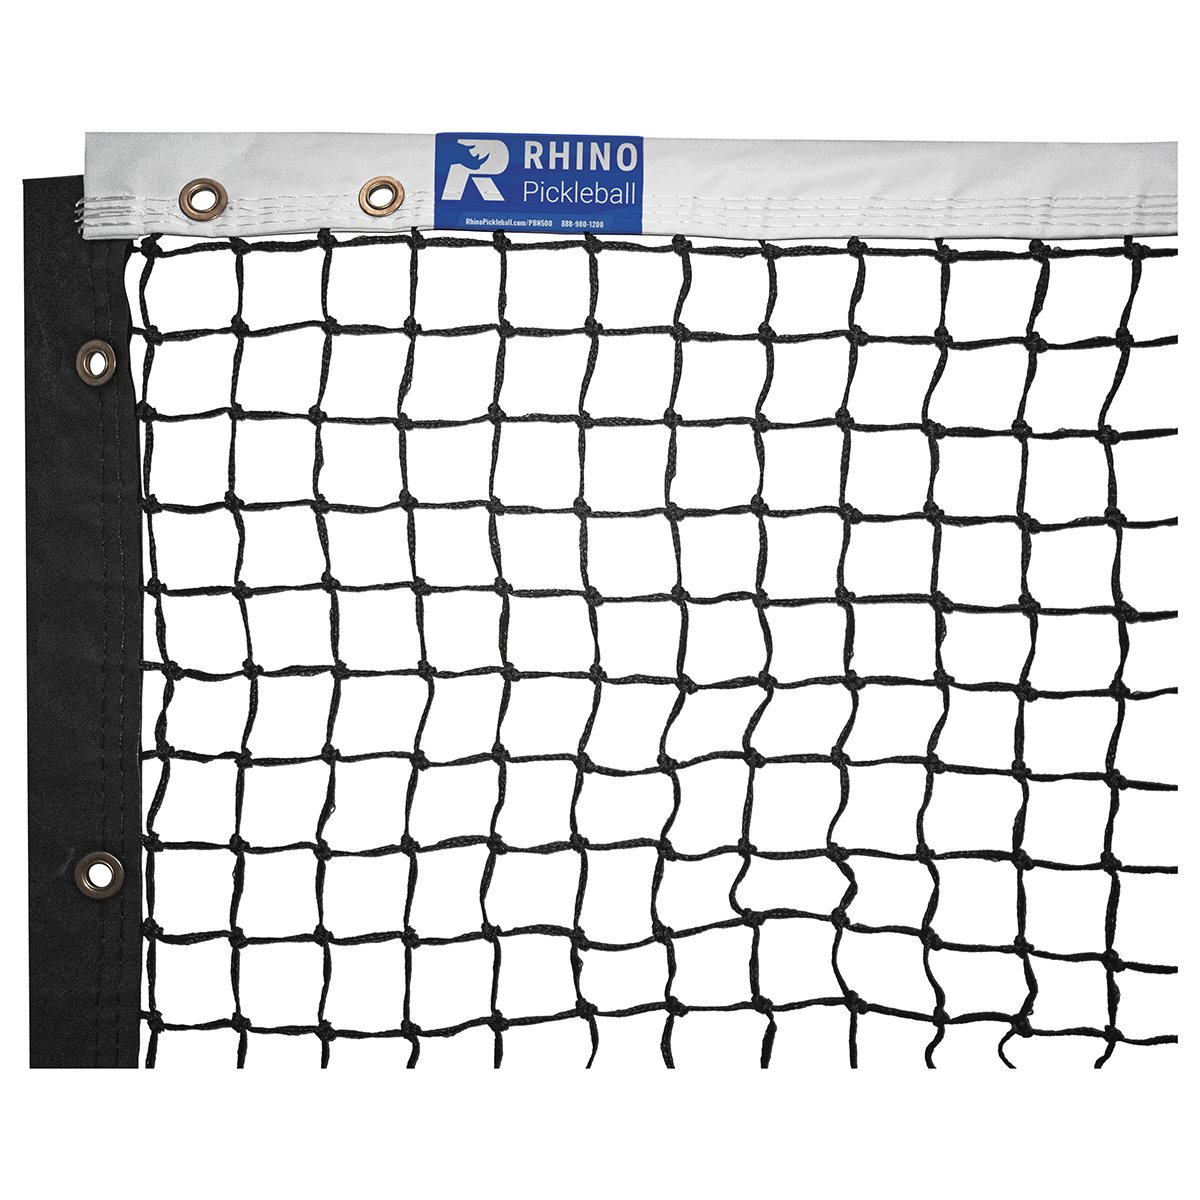 FILA Accessories Pickleball Net - Pickle Ball Game with Net Regulation Size  22 ft - All-Weather Pickle Ball Mesh Net - Includes Carry Bag - Durable,  Quick & Easy Setup, Nets -  Canada